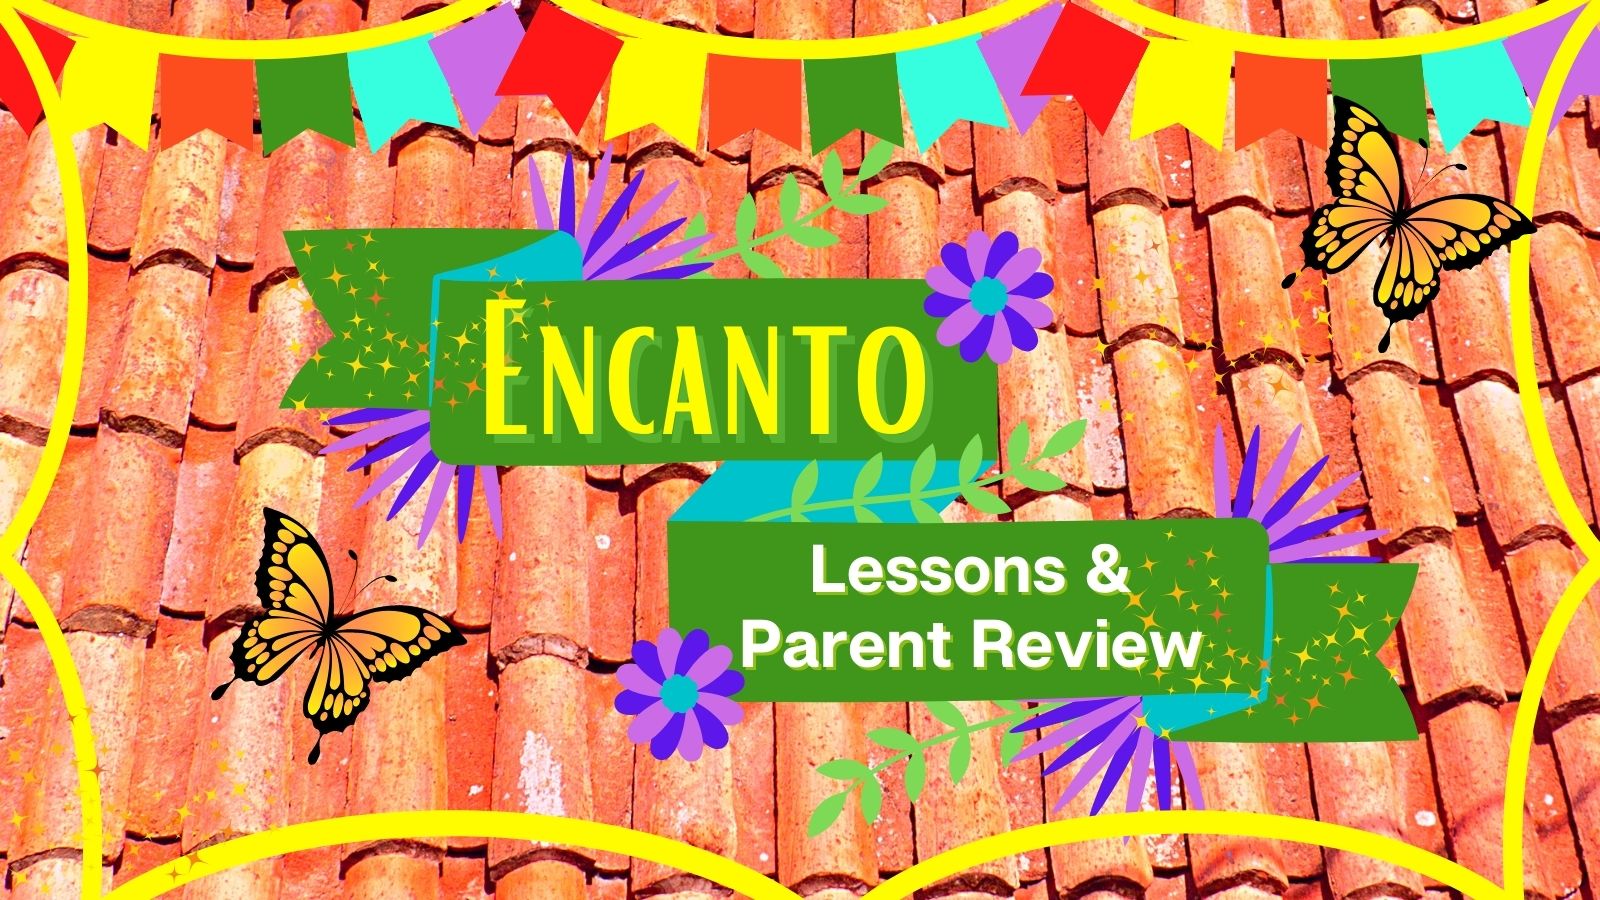 Lessons from Encanto, Discussion Questions, and Parent Review of the Disney movie